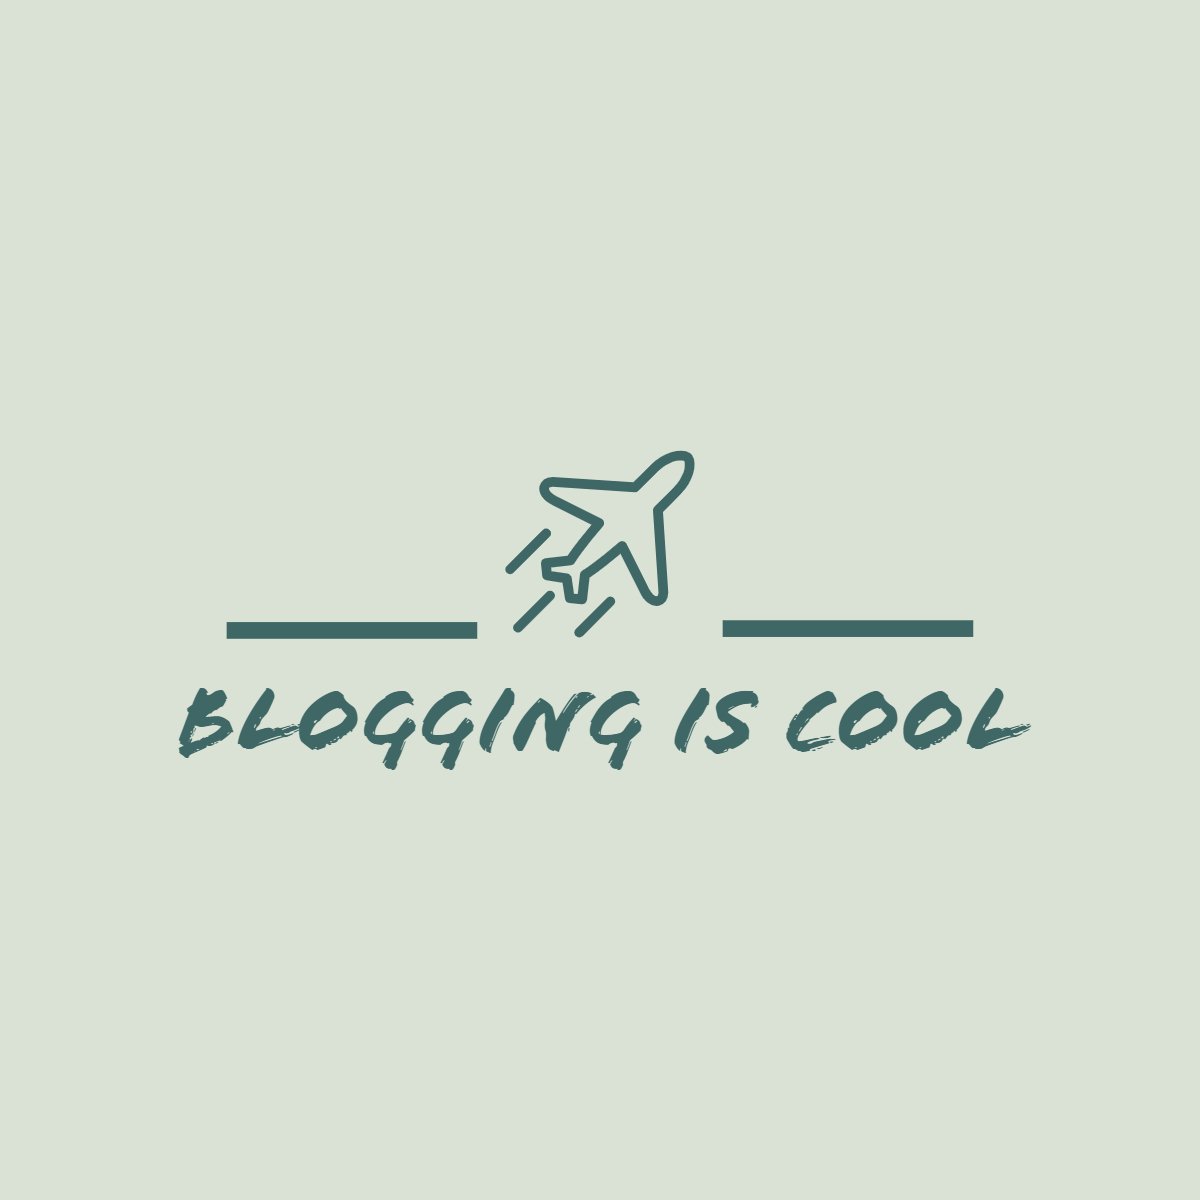 bloggingiscool.com is about helping bloggers improve through inspiration